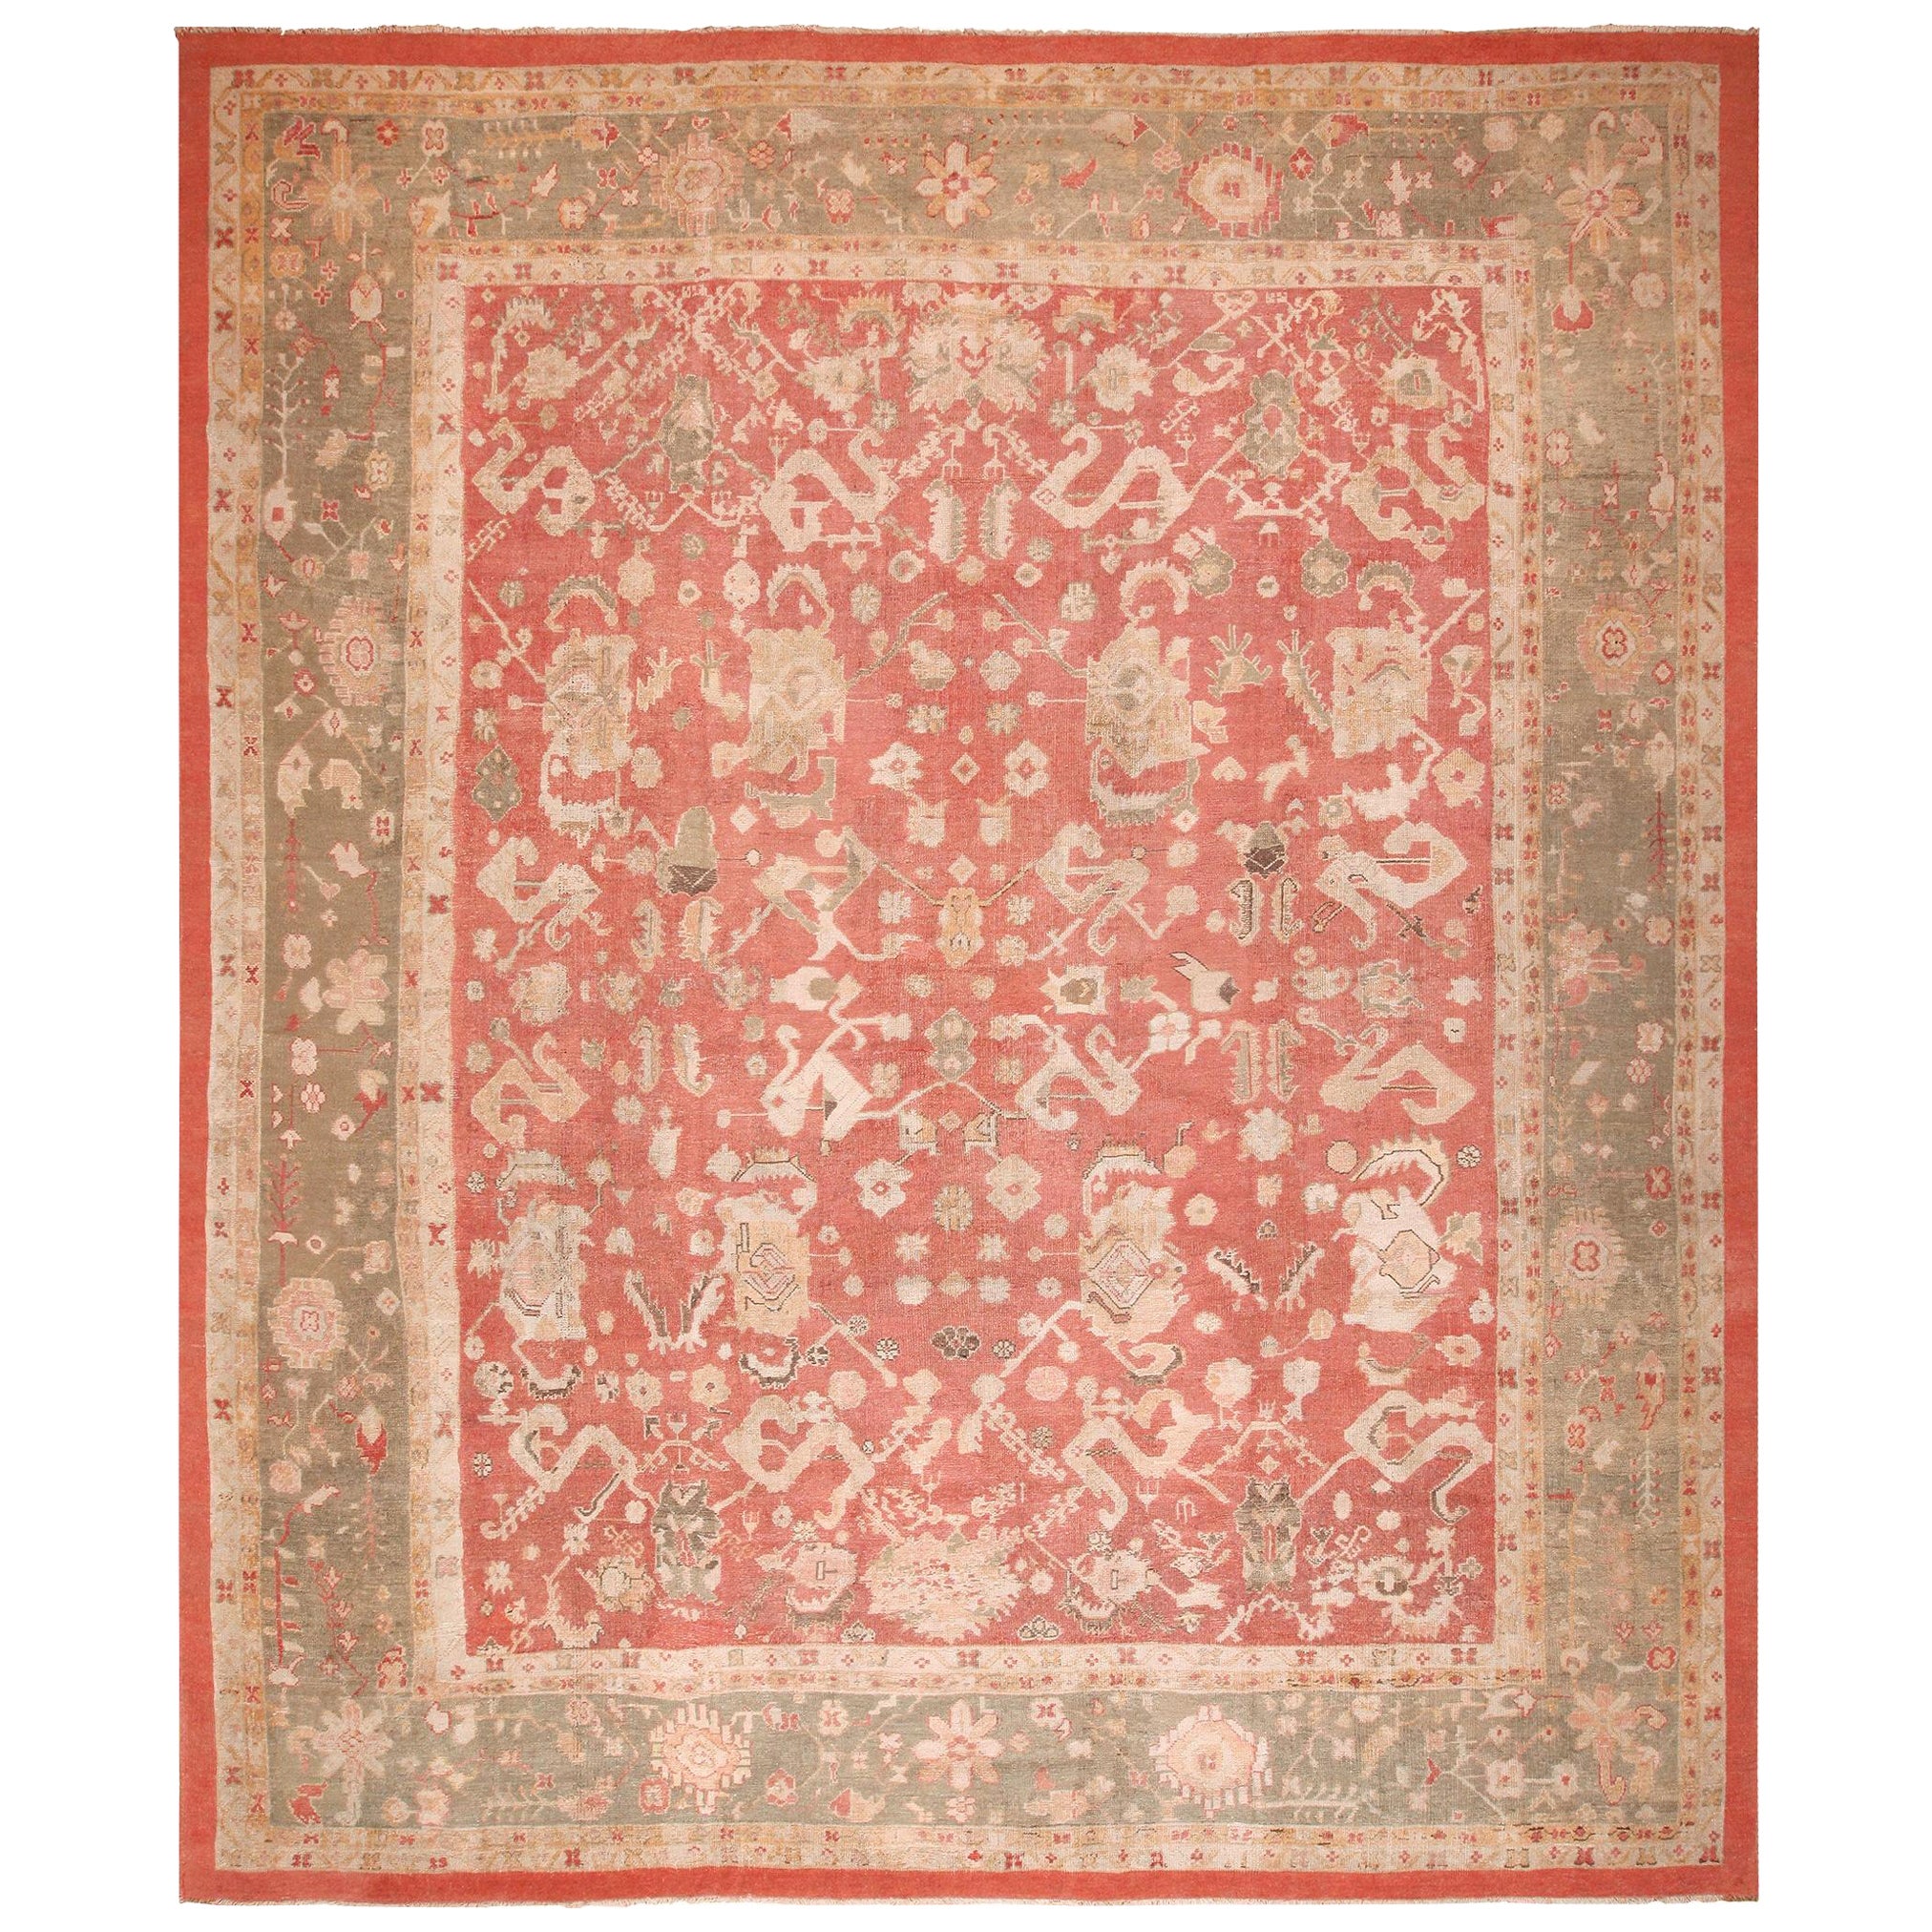 Antique Turkish Oushak Rug. 13 ft. 6 in x 16 ft. 6 in